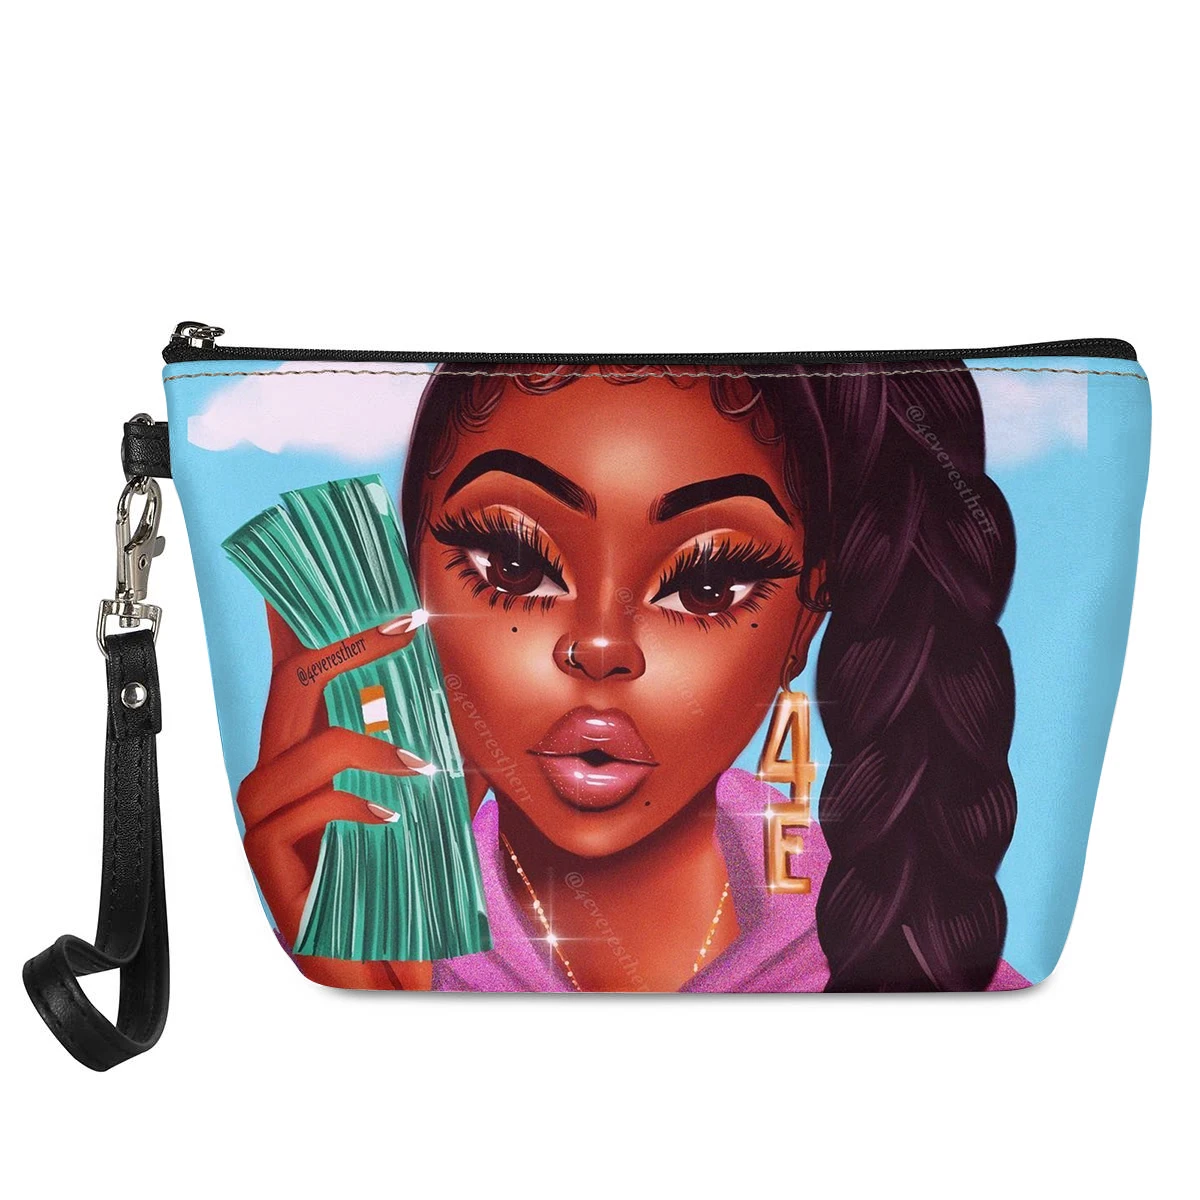 

Portable Make Up Bags for Women Black Art Melanin Poppin Prints Cosmetic Cases Ladies Toiletries Organizers Bags Makeup Pouch, Picture color